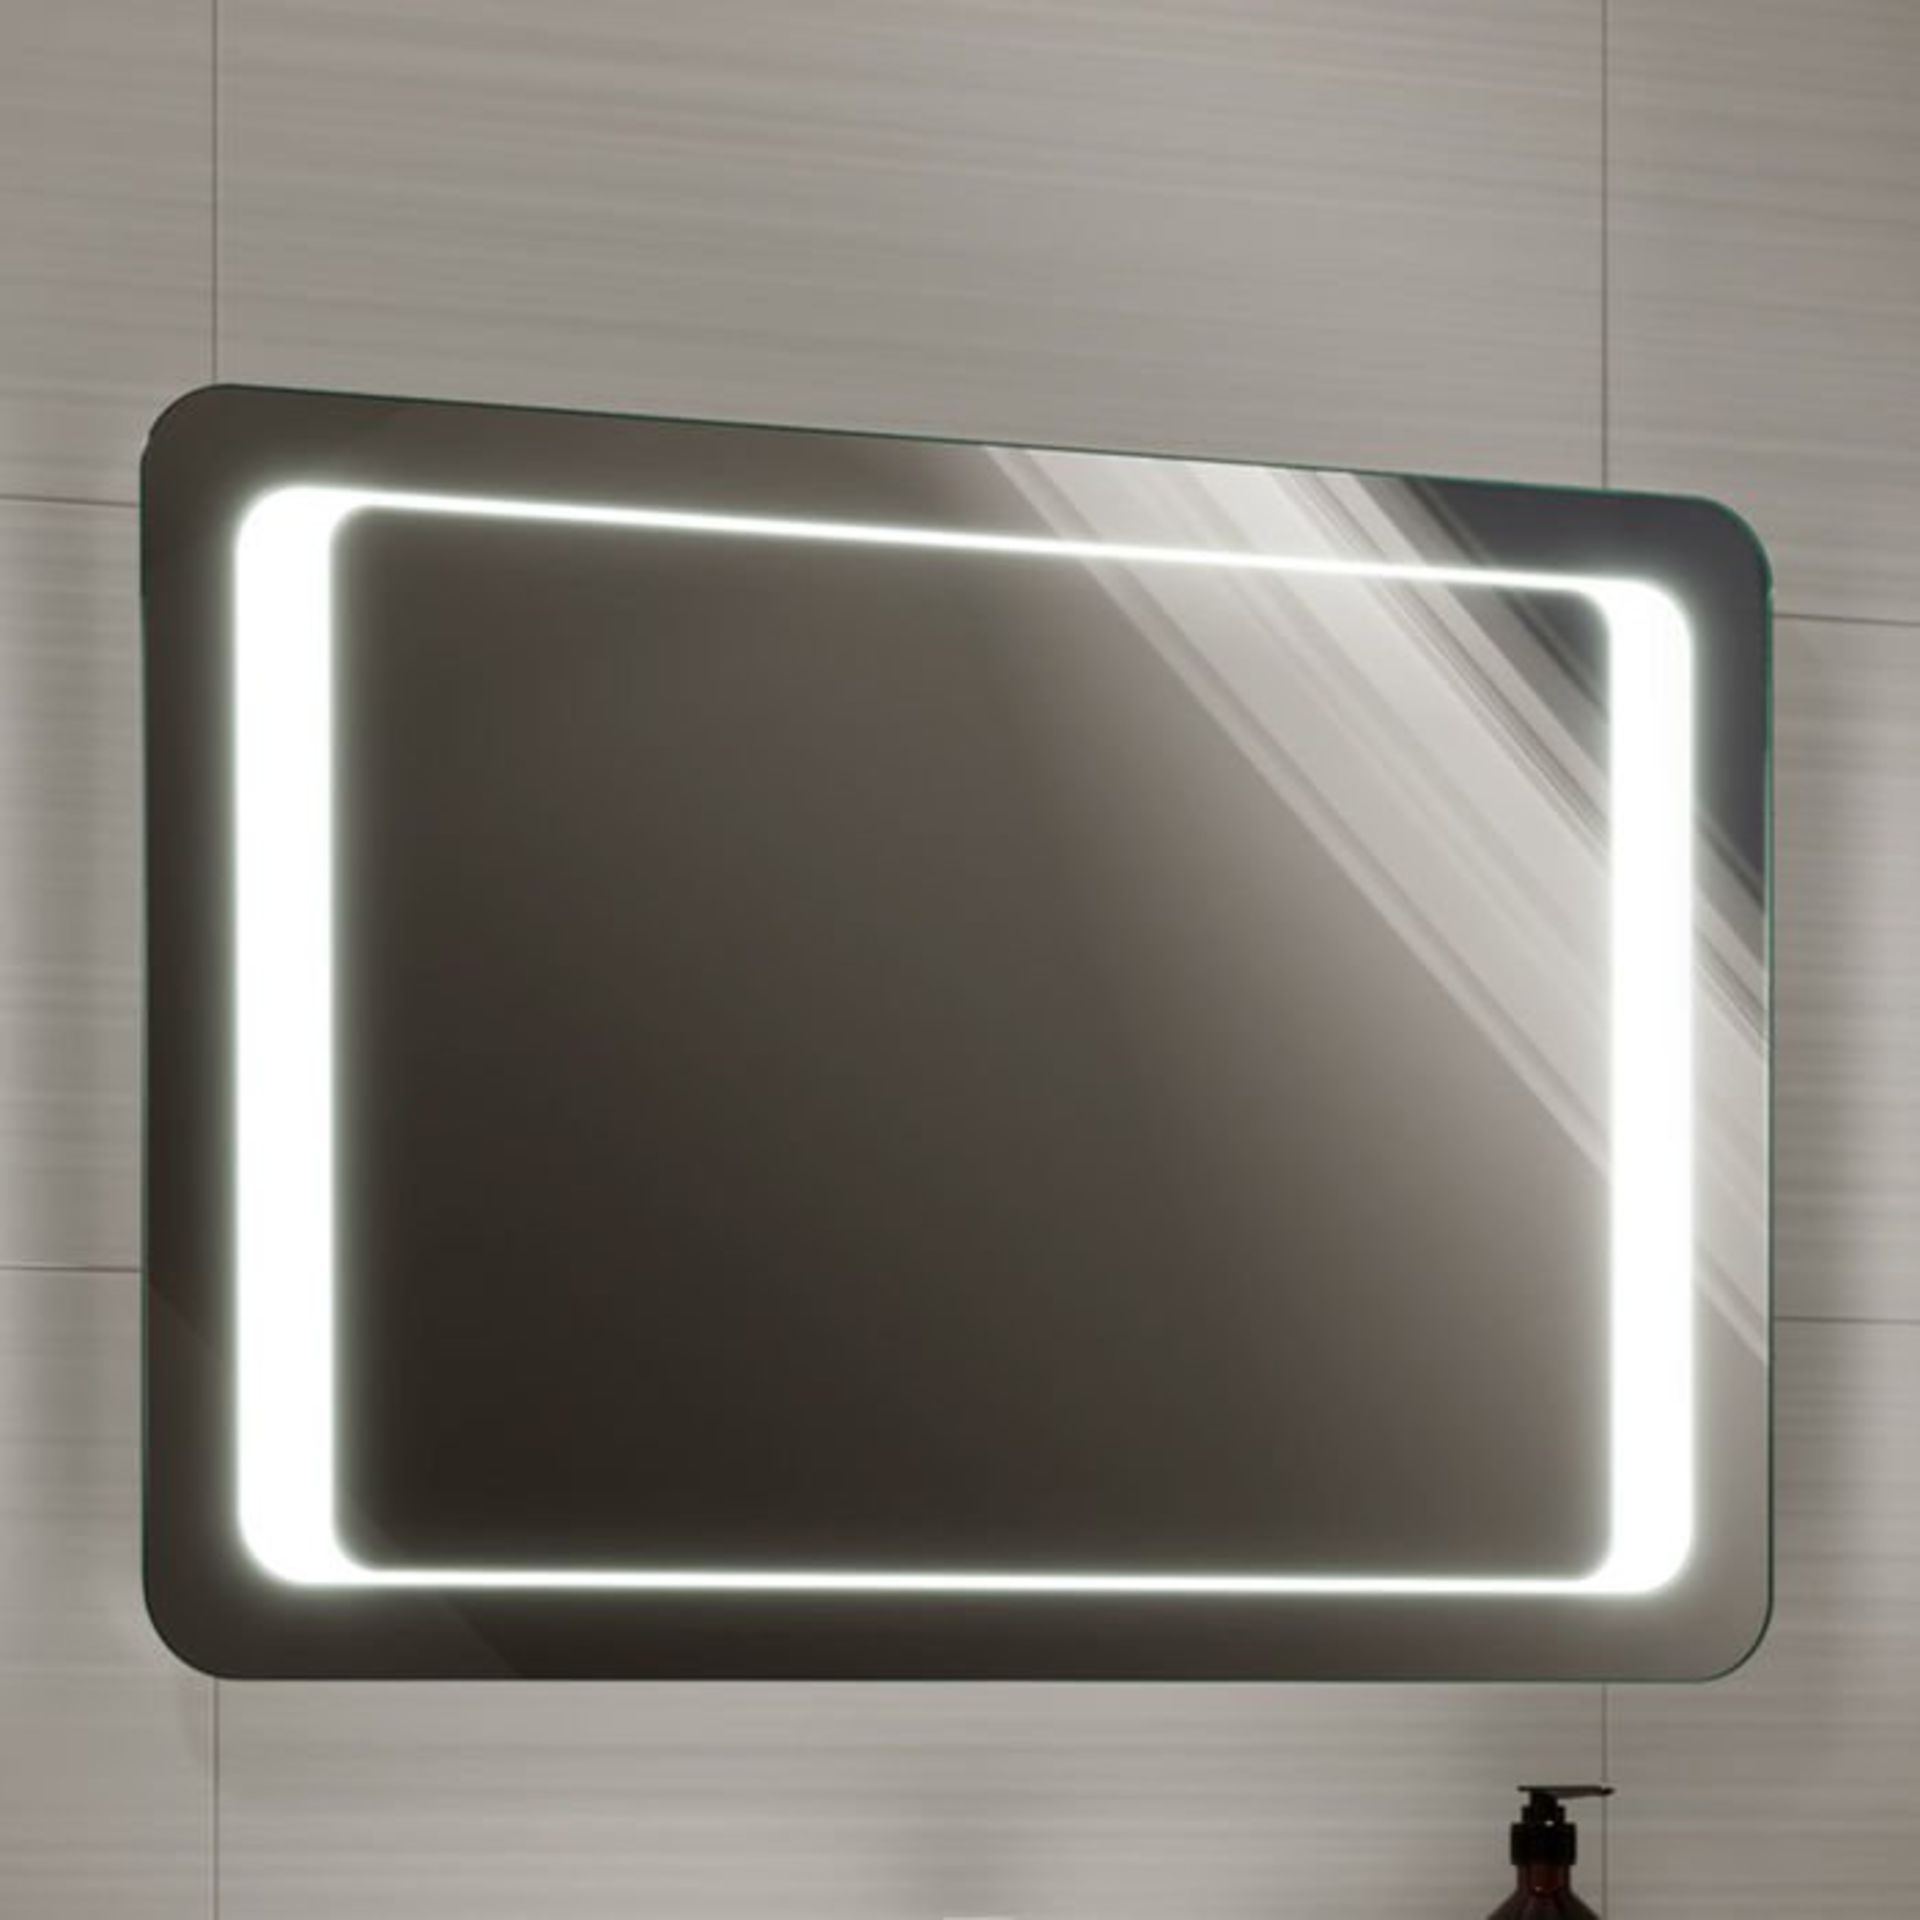 (Y29) 700x500mm Quasar Illuminated LED Mirror. RRP £349.99. Energy efficient LED lighting with